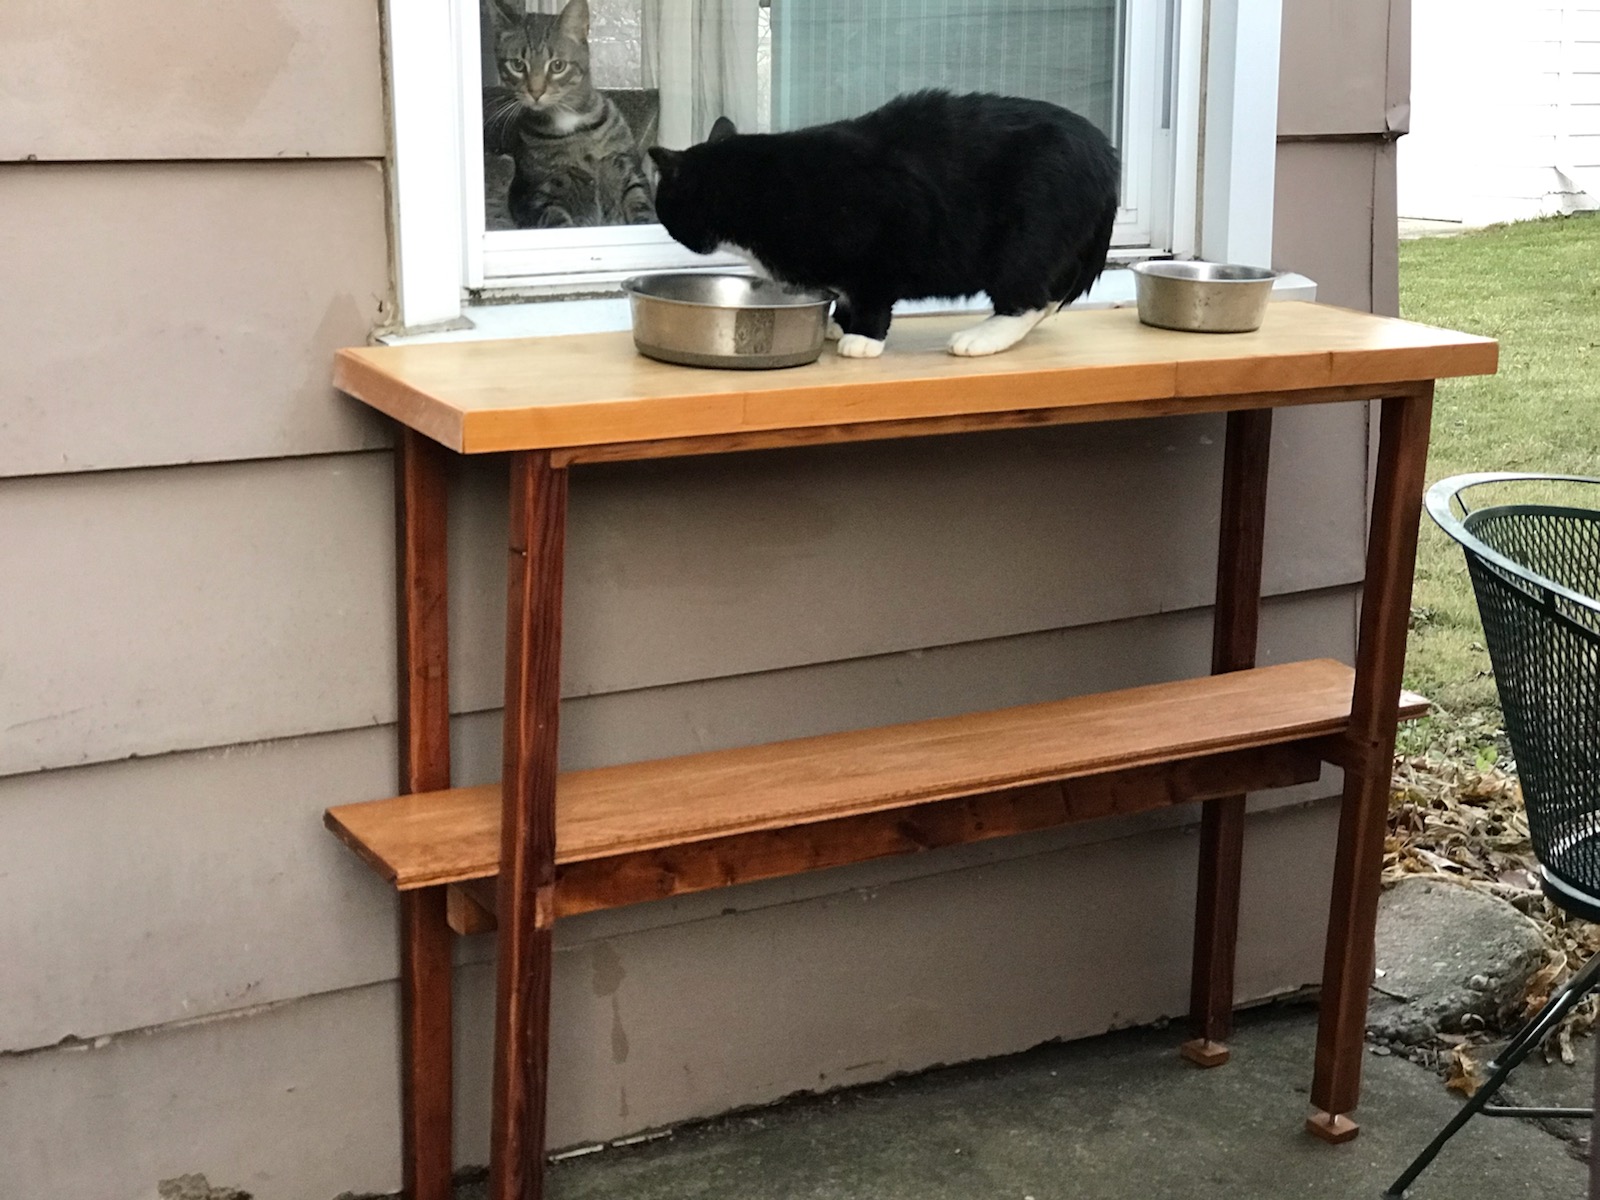 table for cats in its new home